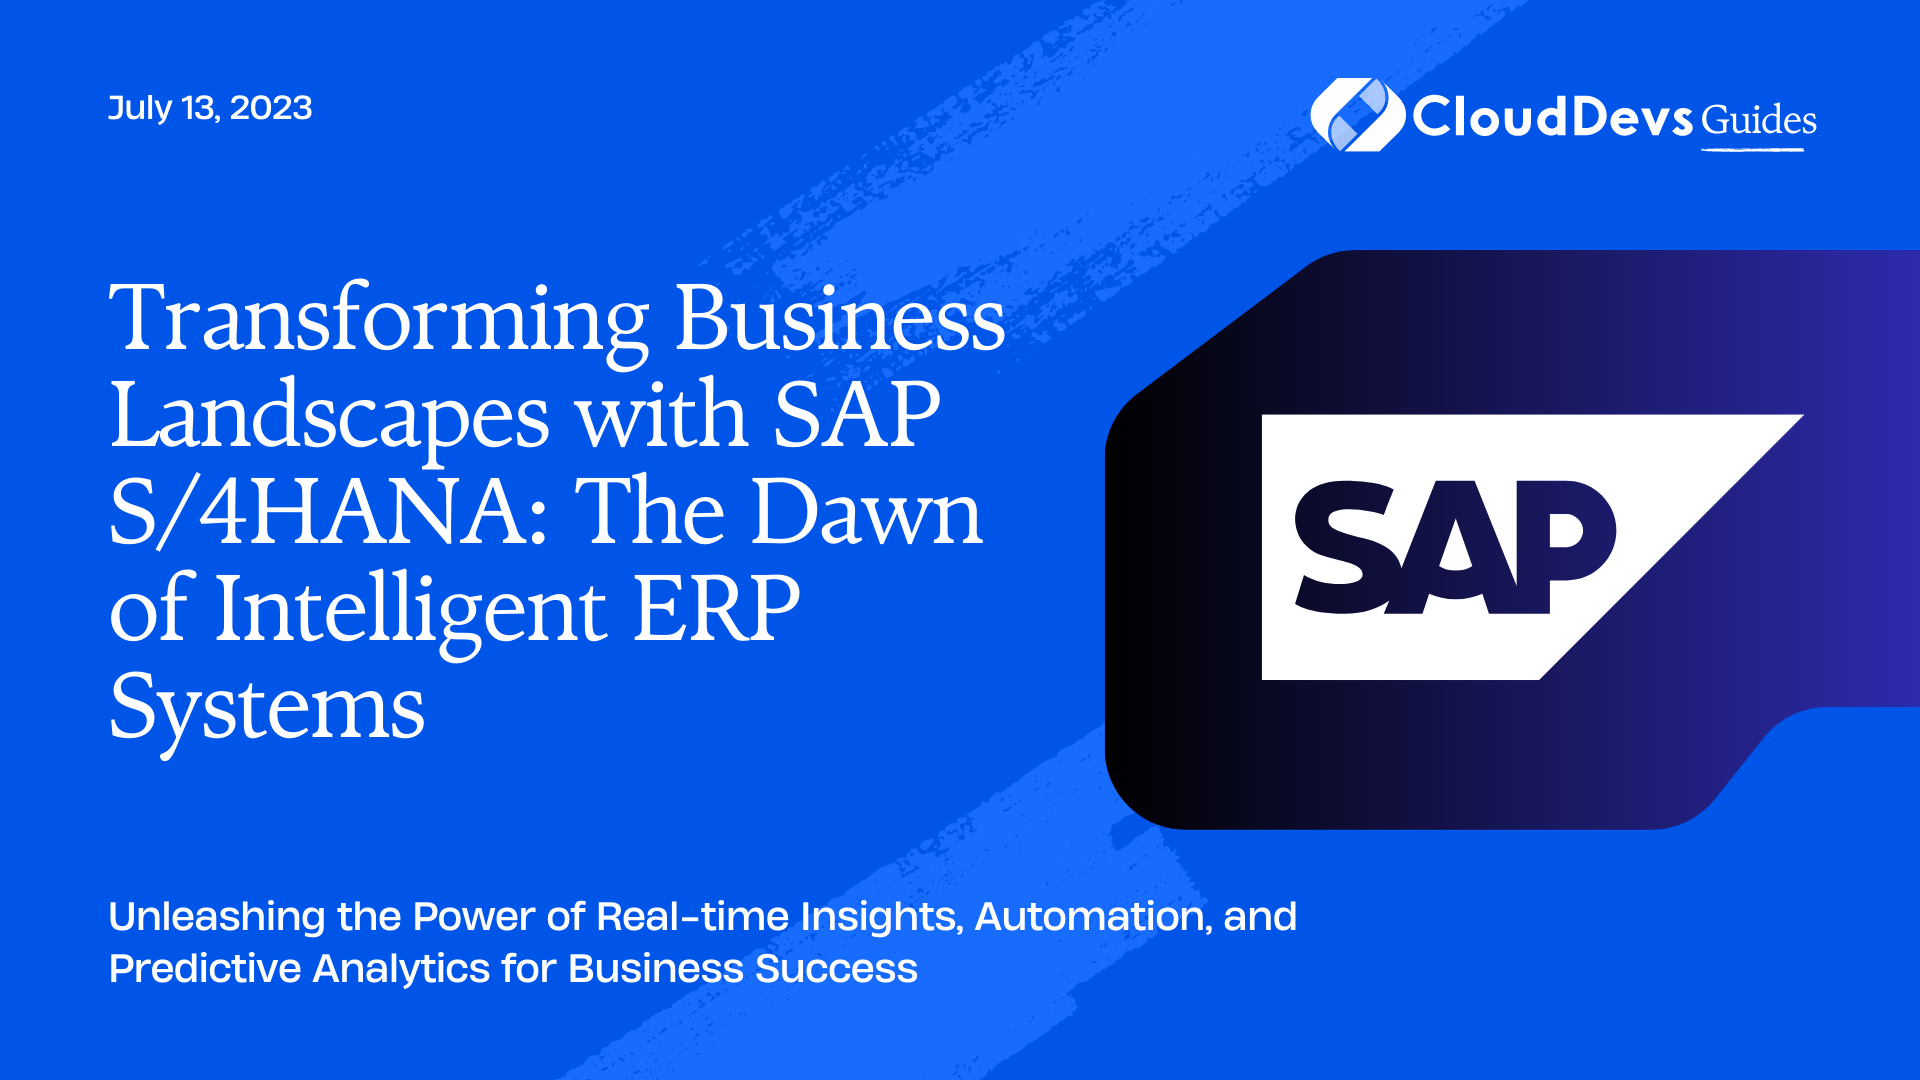 Transforming Business Landscapes with SAP S/4HANA: The Dawn of Intelligent ERP Systems